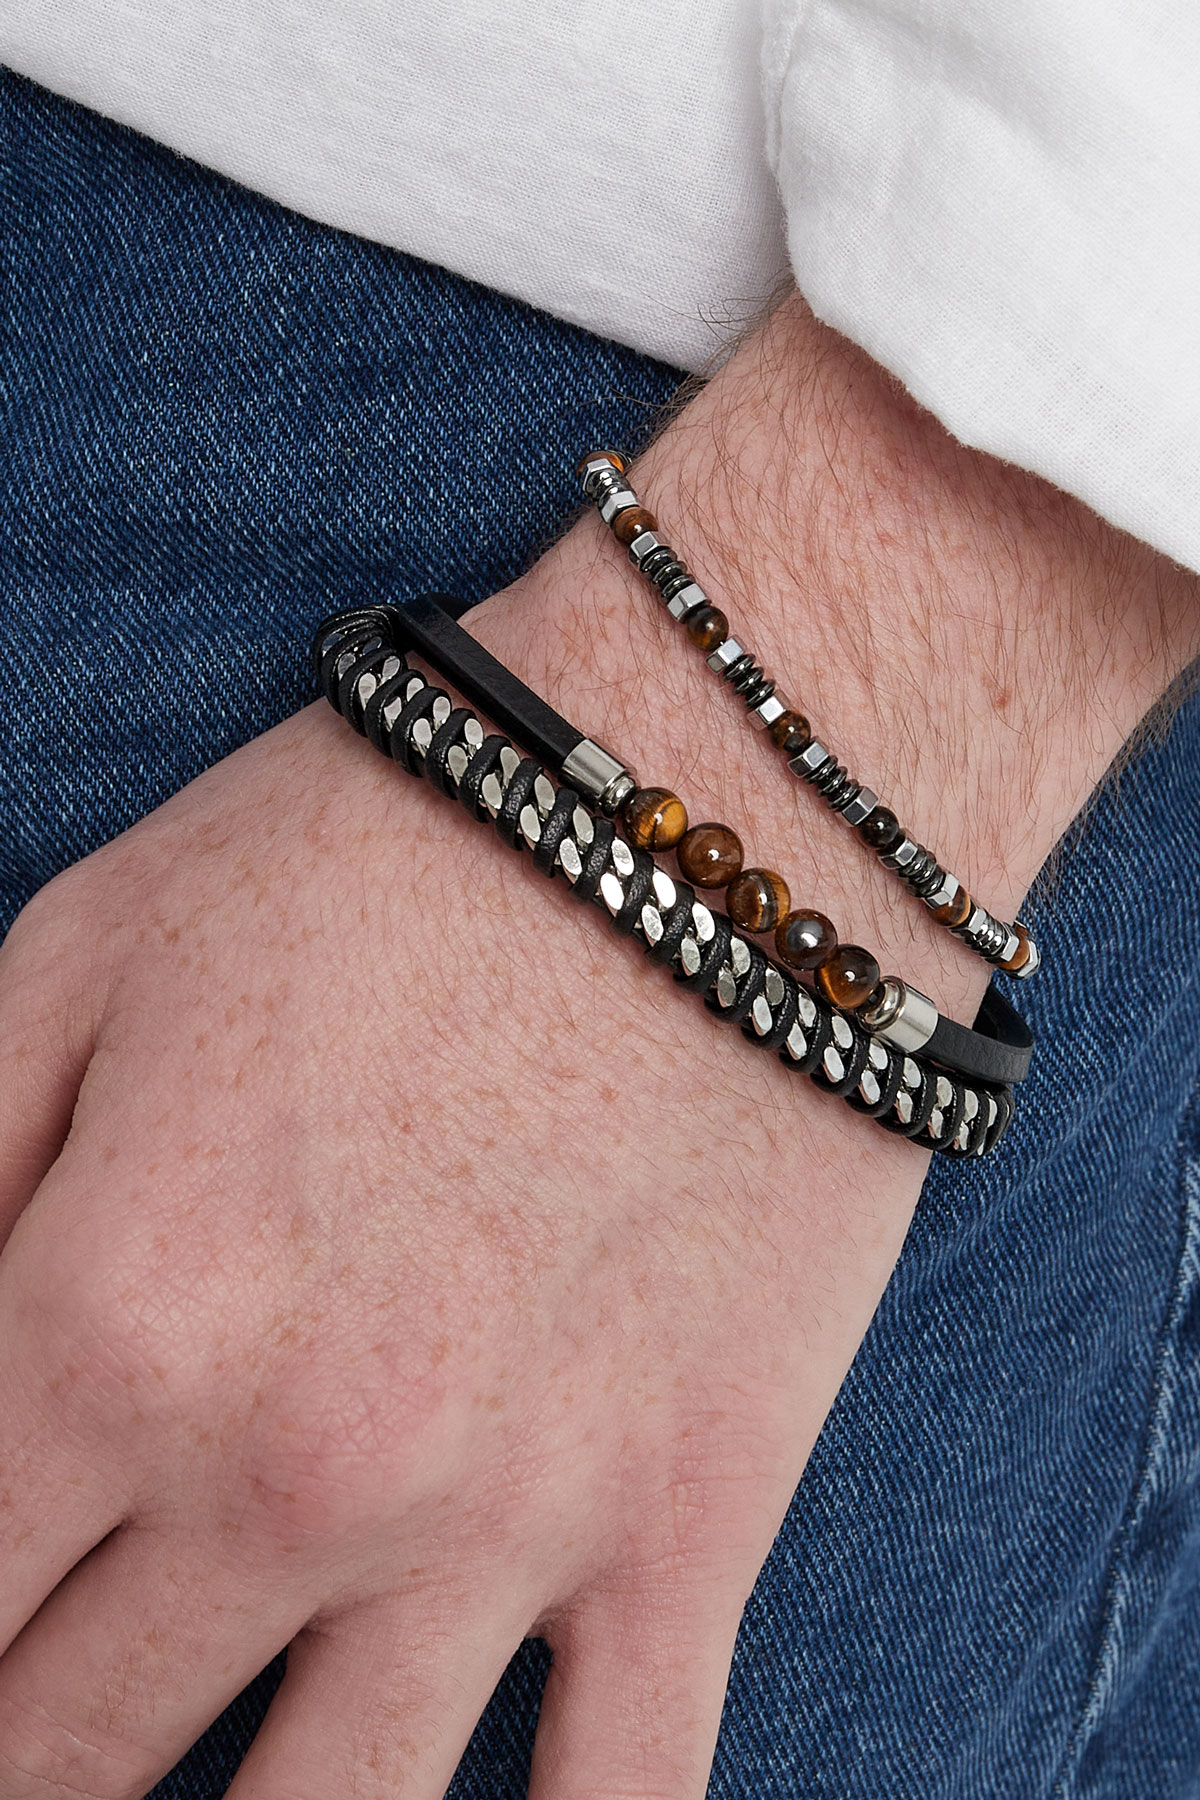 Simple men's bracelet with beads - black silver h5 Picture2